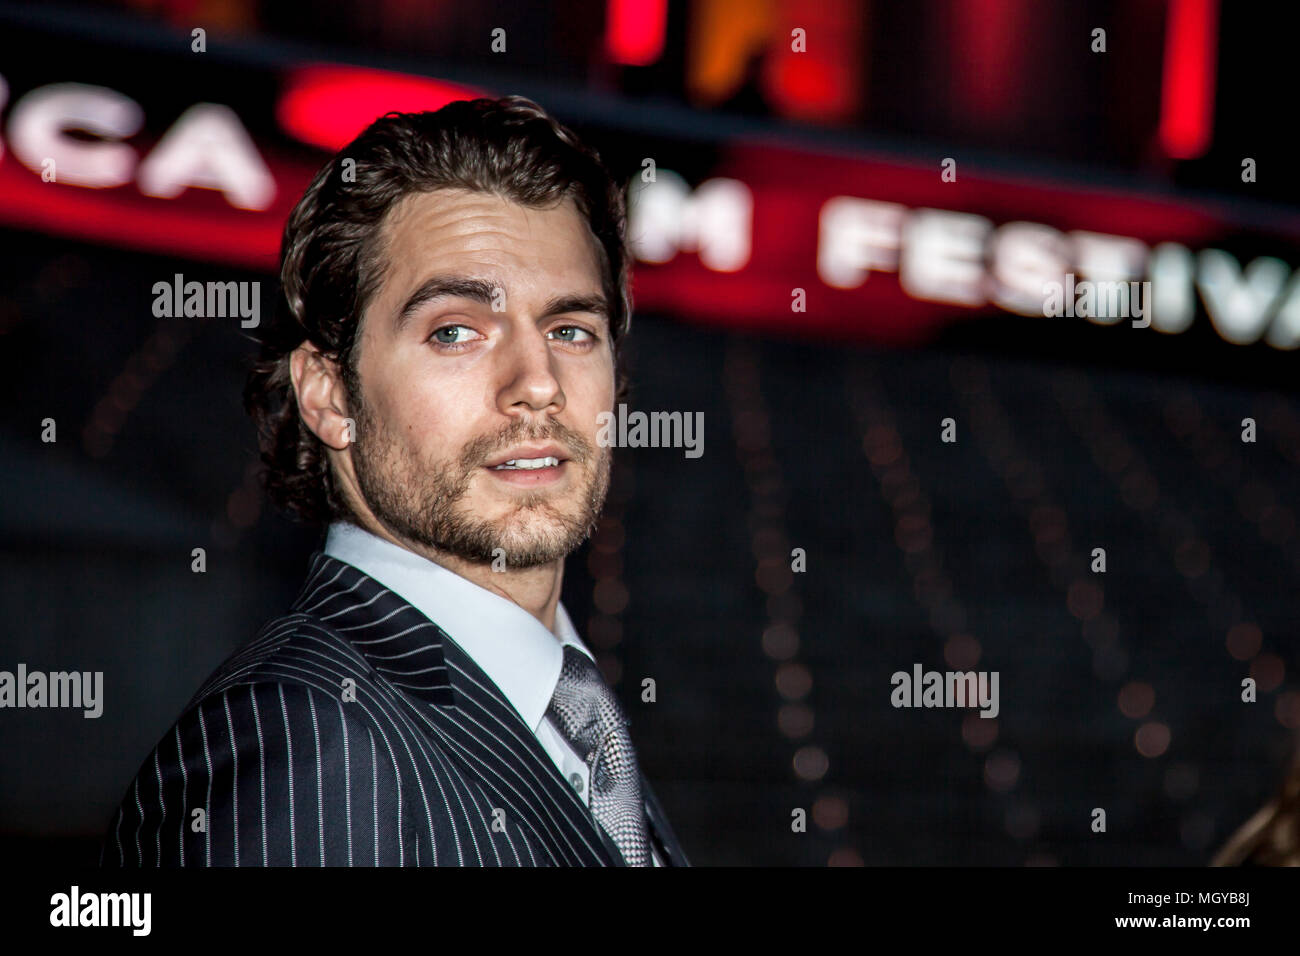 NEW YORK - APRIL 21: Actor Henry Cavill attends the Vanity Fair party during the 8th annual Tribeca Film Festival at the State Supreme Courthouse Stock Photo